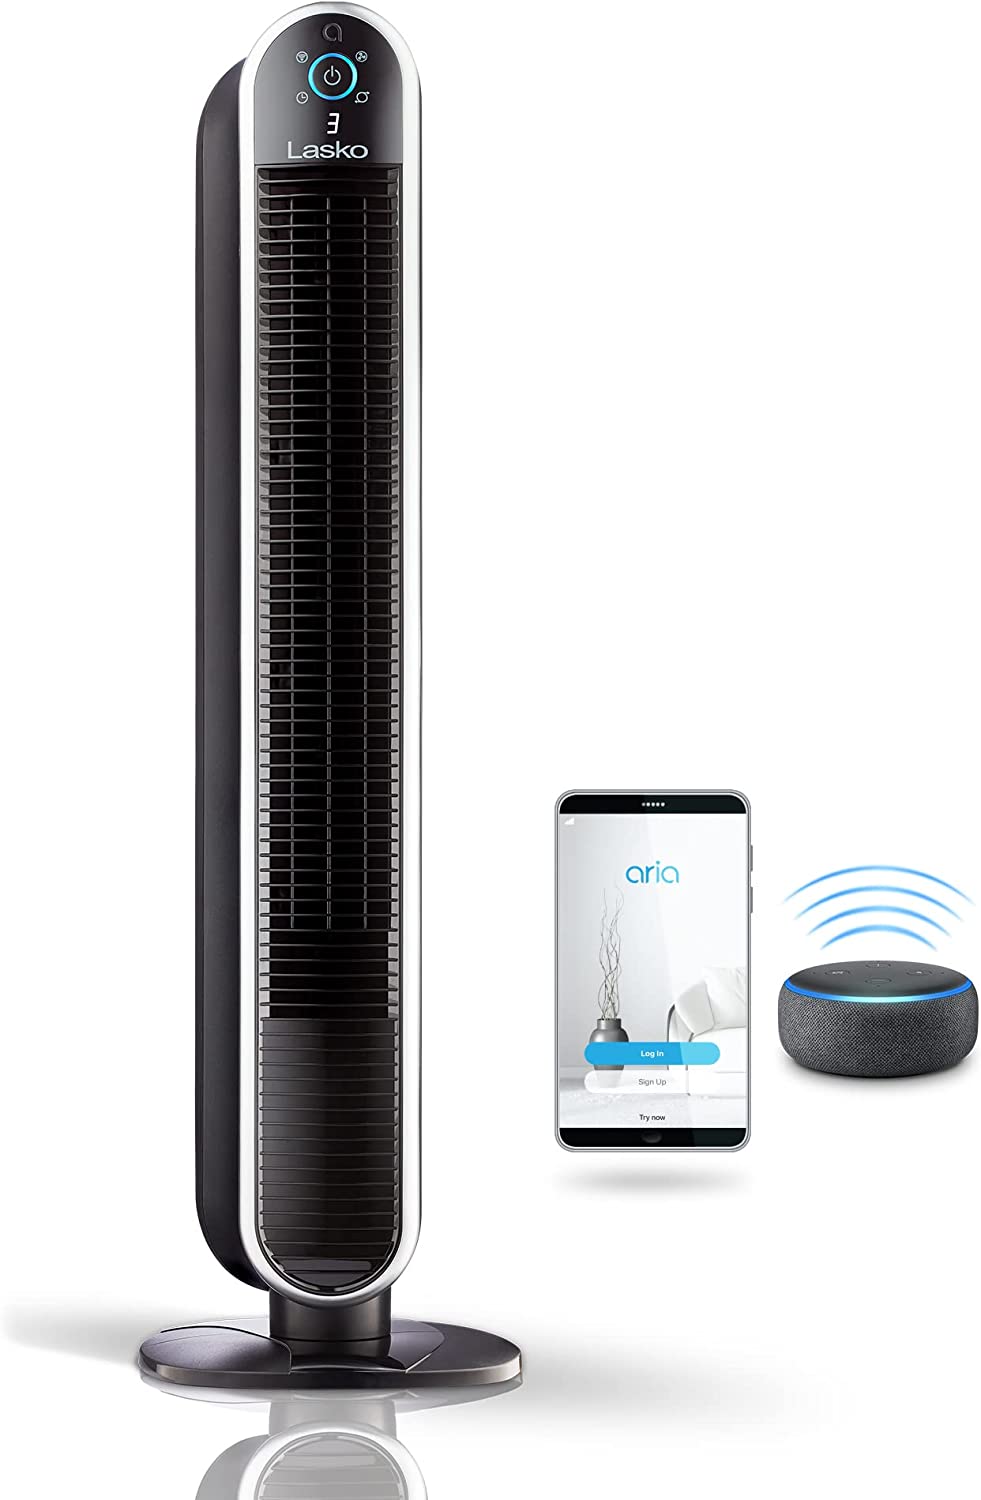 Lasko 40” Smart Oscillating Tower Fan Powered by Aria, Wi-Fi Connected, Voice Controlled, Compatible with Alexa and Google Assistant, Timer, 5-Speeds, Black.